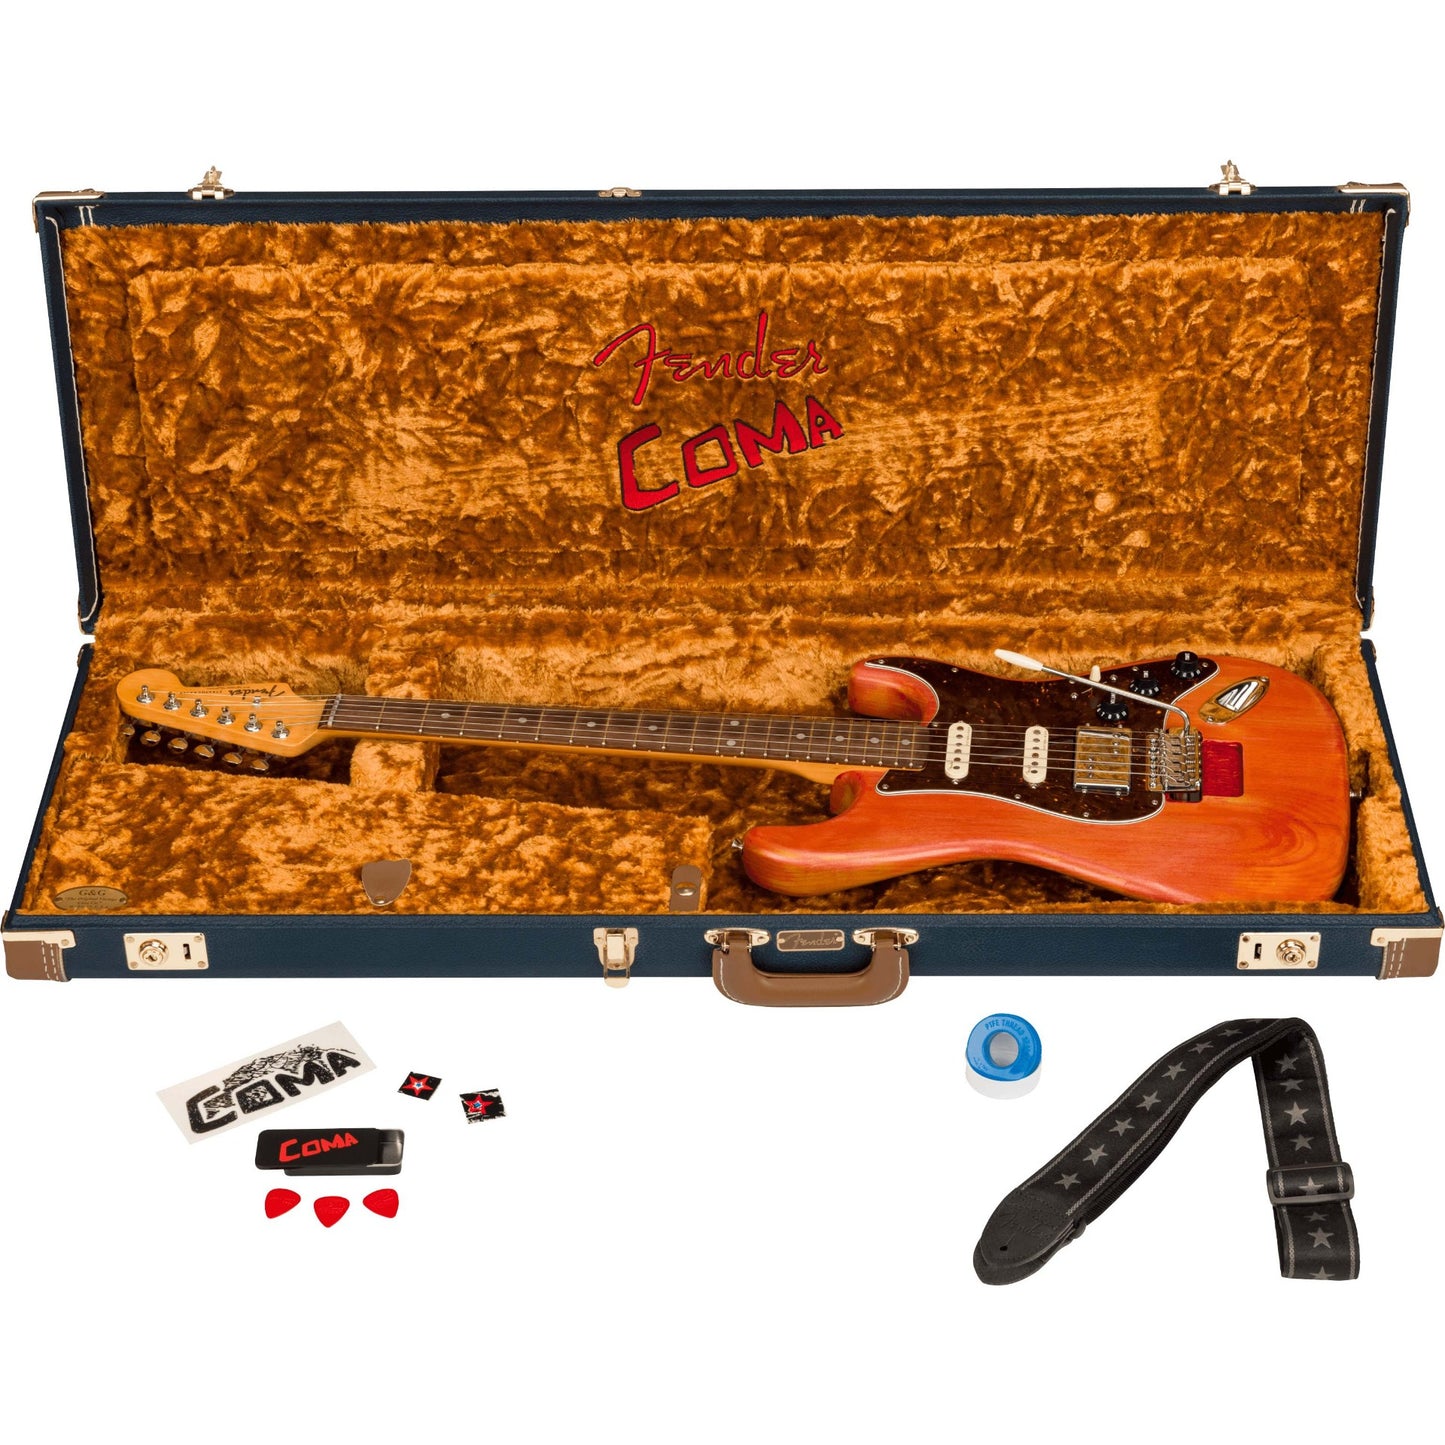 Fender Stories Collection Michael Landau Coma Stratocaster in Coma Red